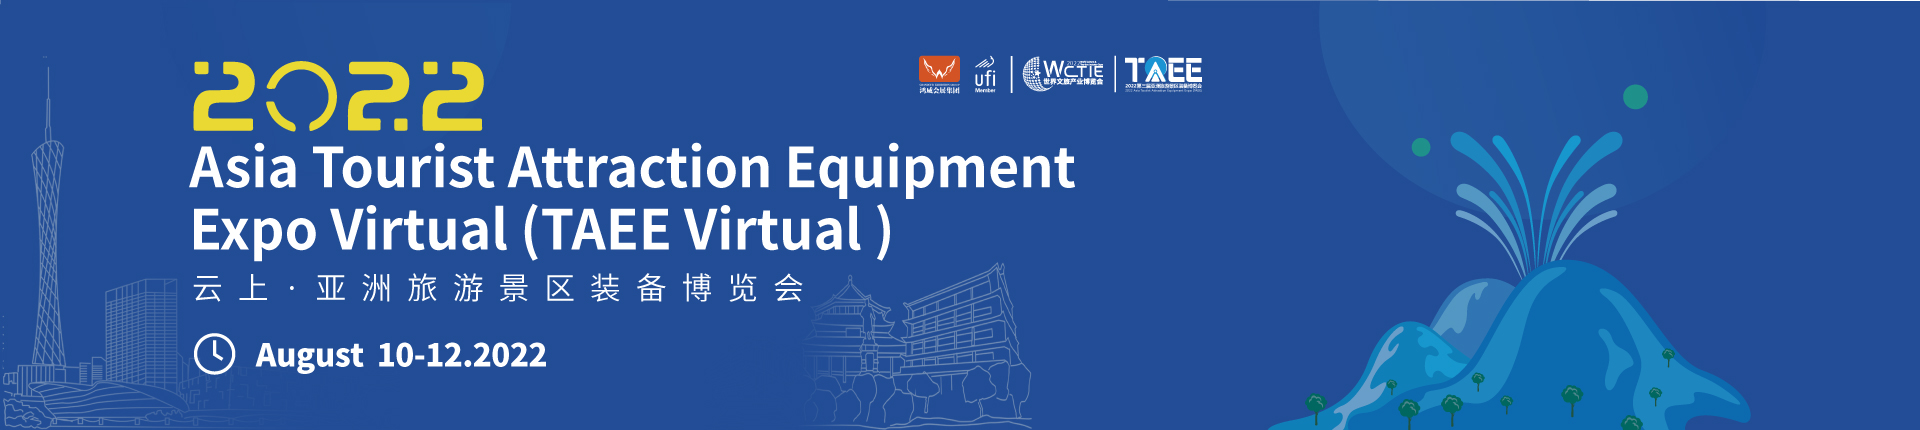 2022 Asia Tourism Attraction Equipment Expo Virtual (TAEE Virtual)